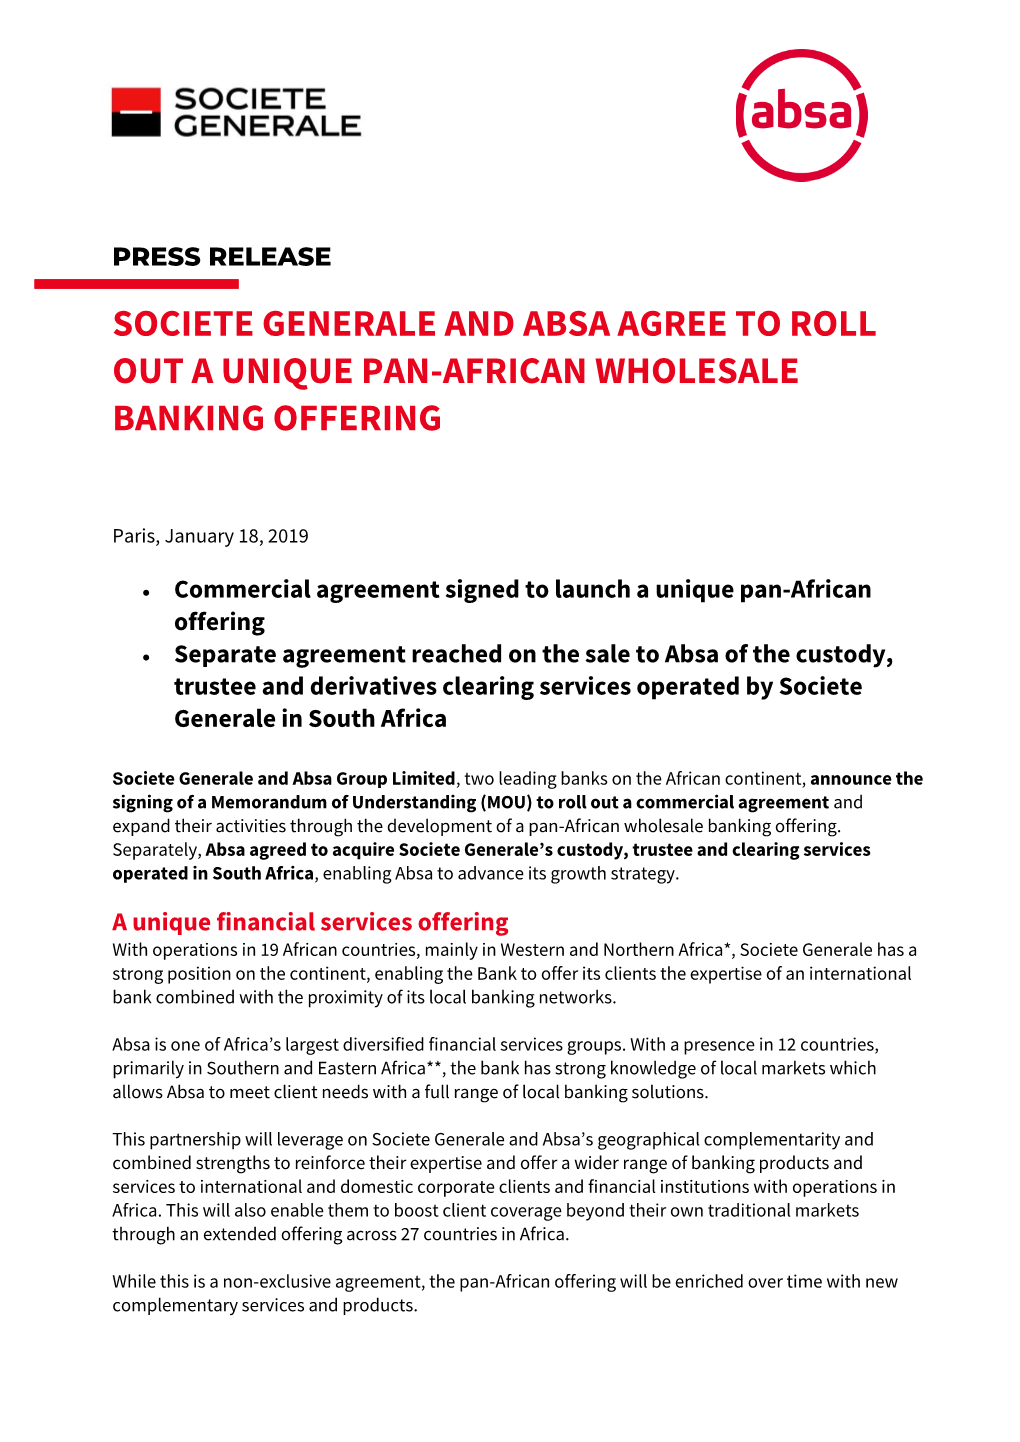 Societe Generale and Absa Agree to Roll out a Unique Pan-African Wholesale Banking Offering